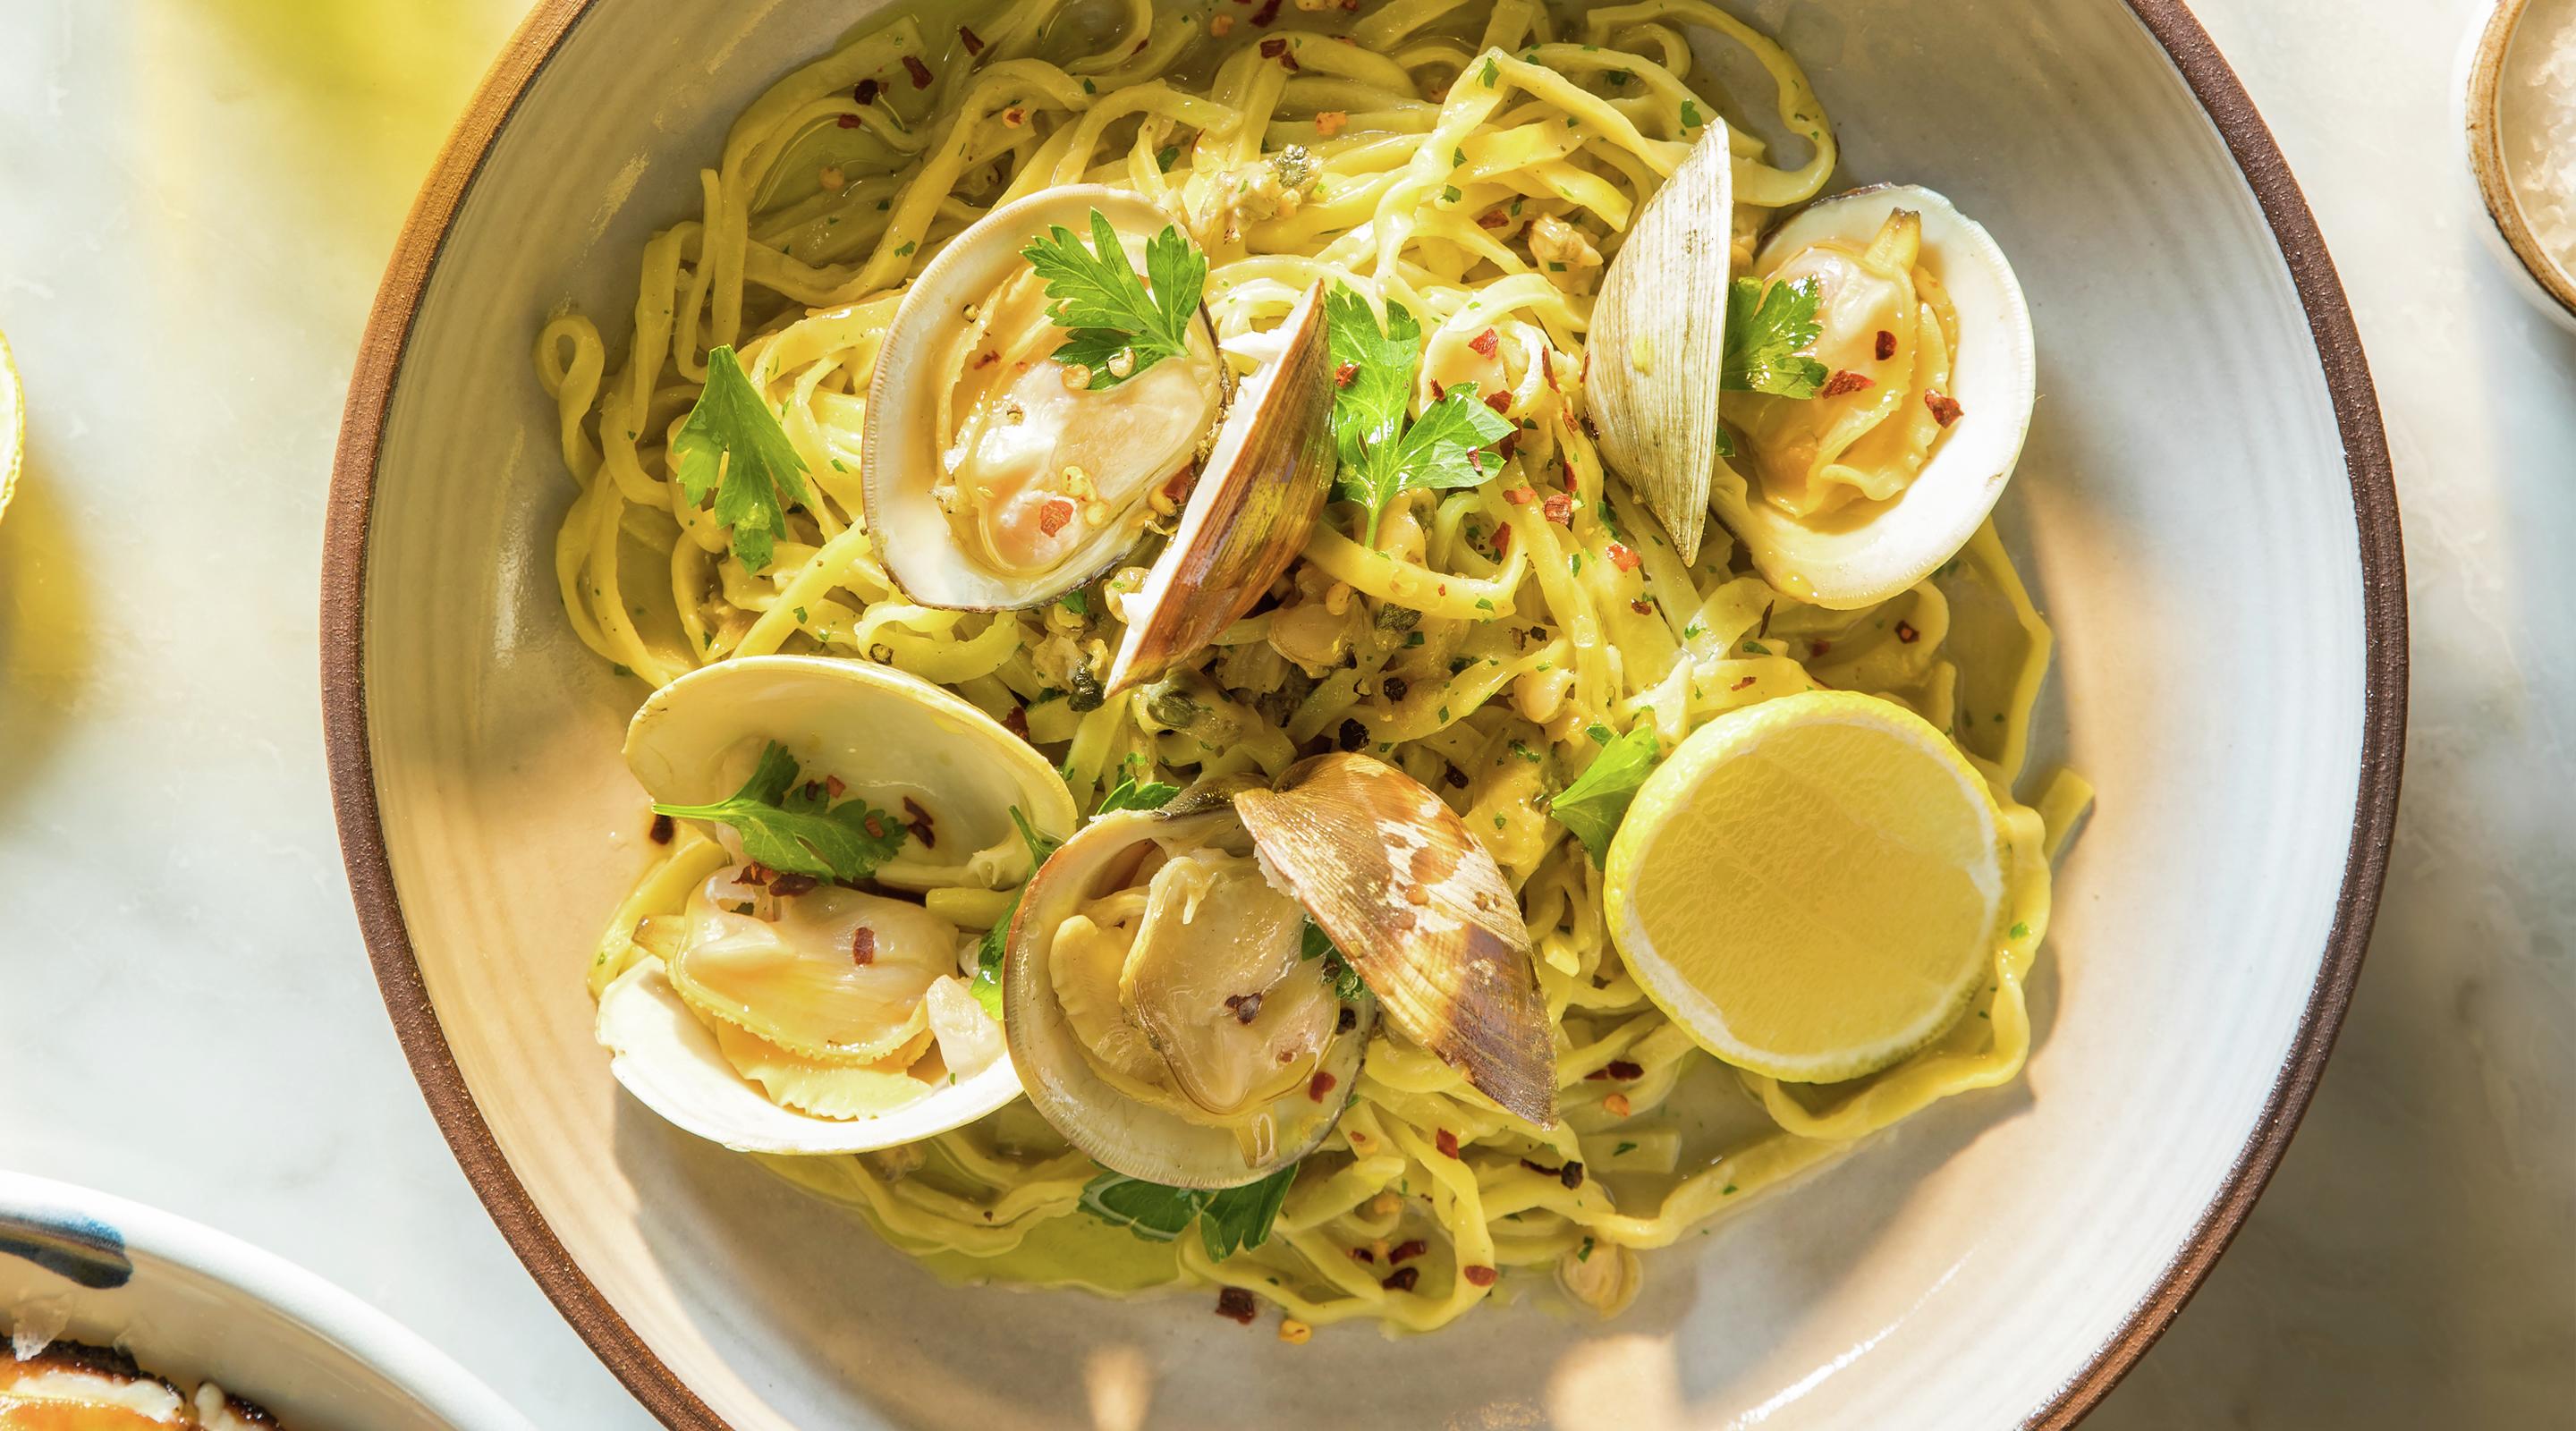 A linguine and clams dish at Osteria Costa